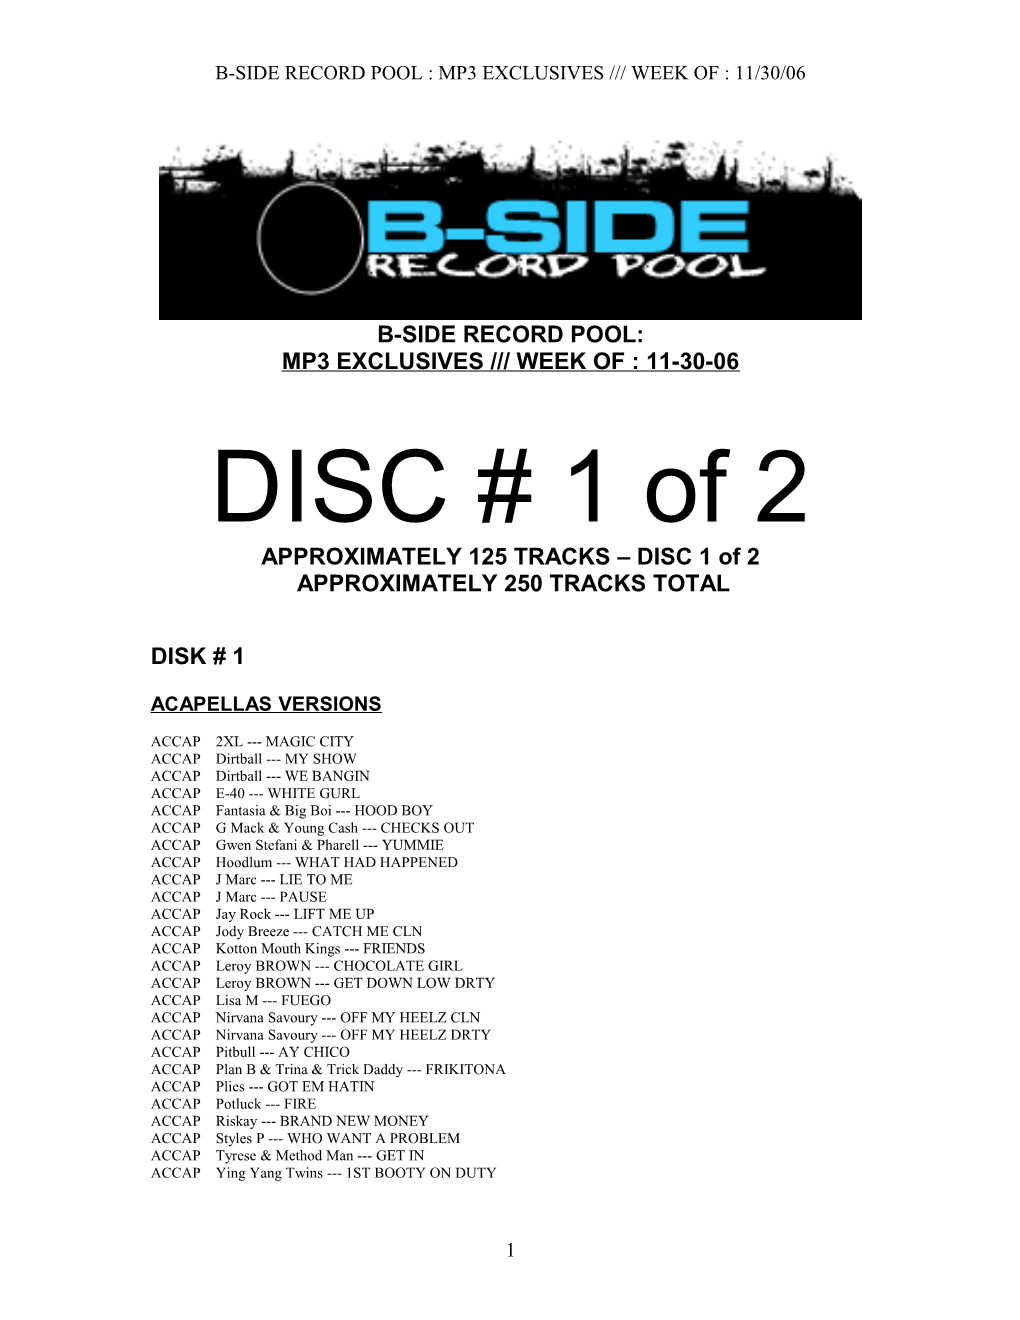 B-Side Record Pool : Mp3 Exclusives Week of : 11/30/06